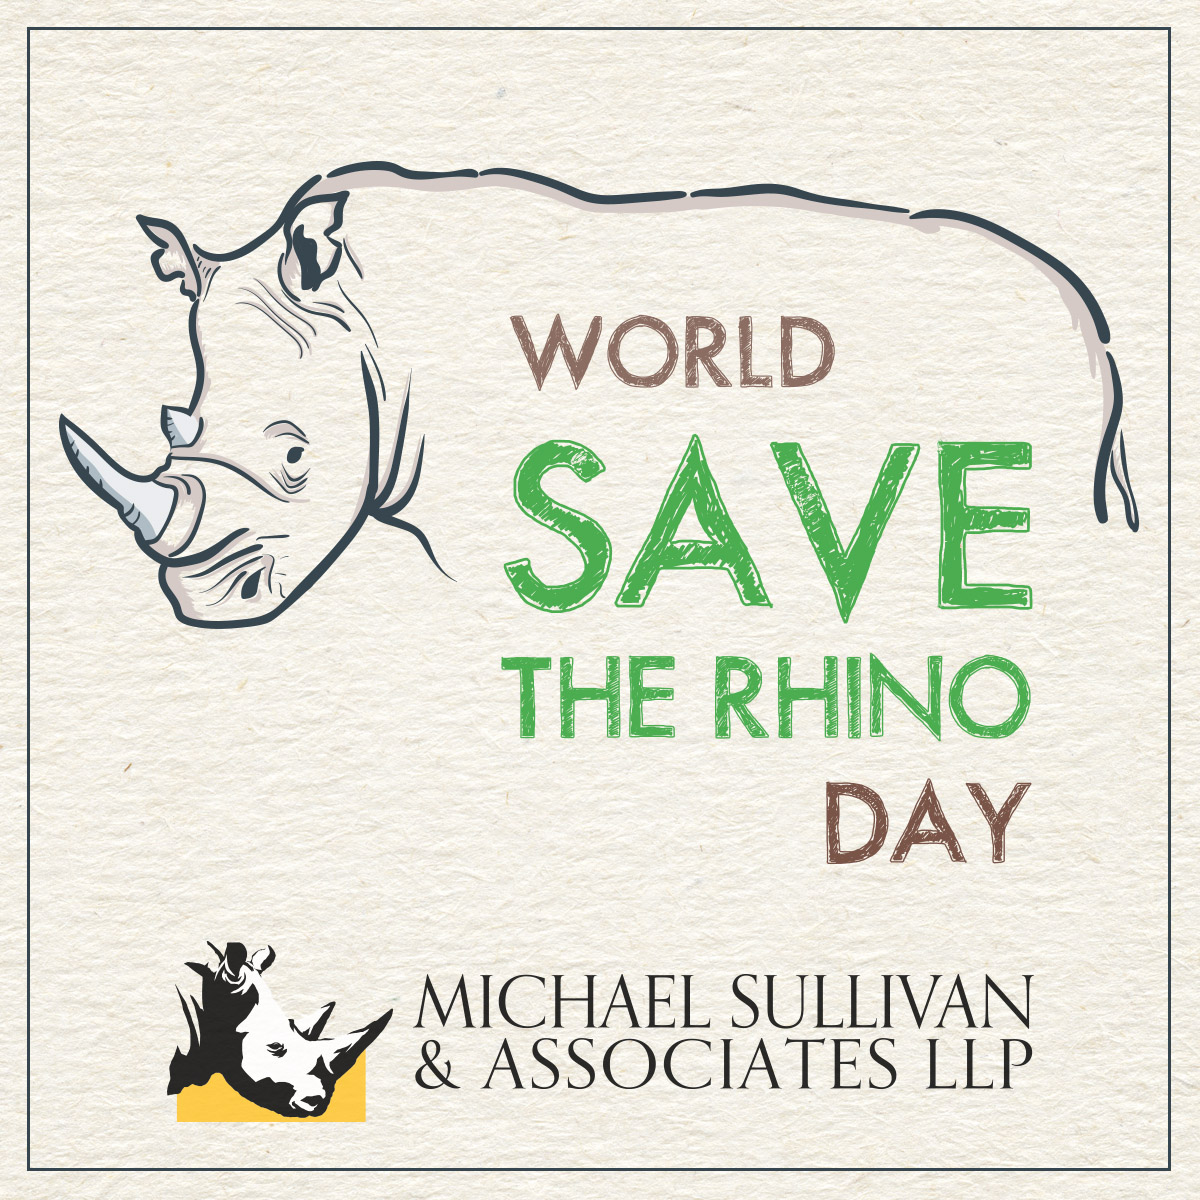 🦏 Wishing everyone a Happy Save the Rhino Day! MS&A proudly supports Save the Rhino International, a non-profit group protecting rhinos from poachers. Learn more at ➡️ savetherhino.org.
#SaveTheRhino #TeamRhino @savetherhino